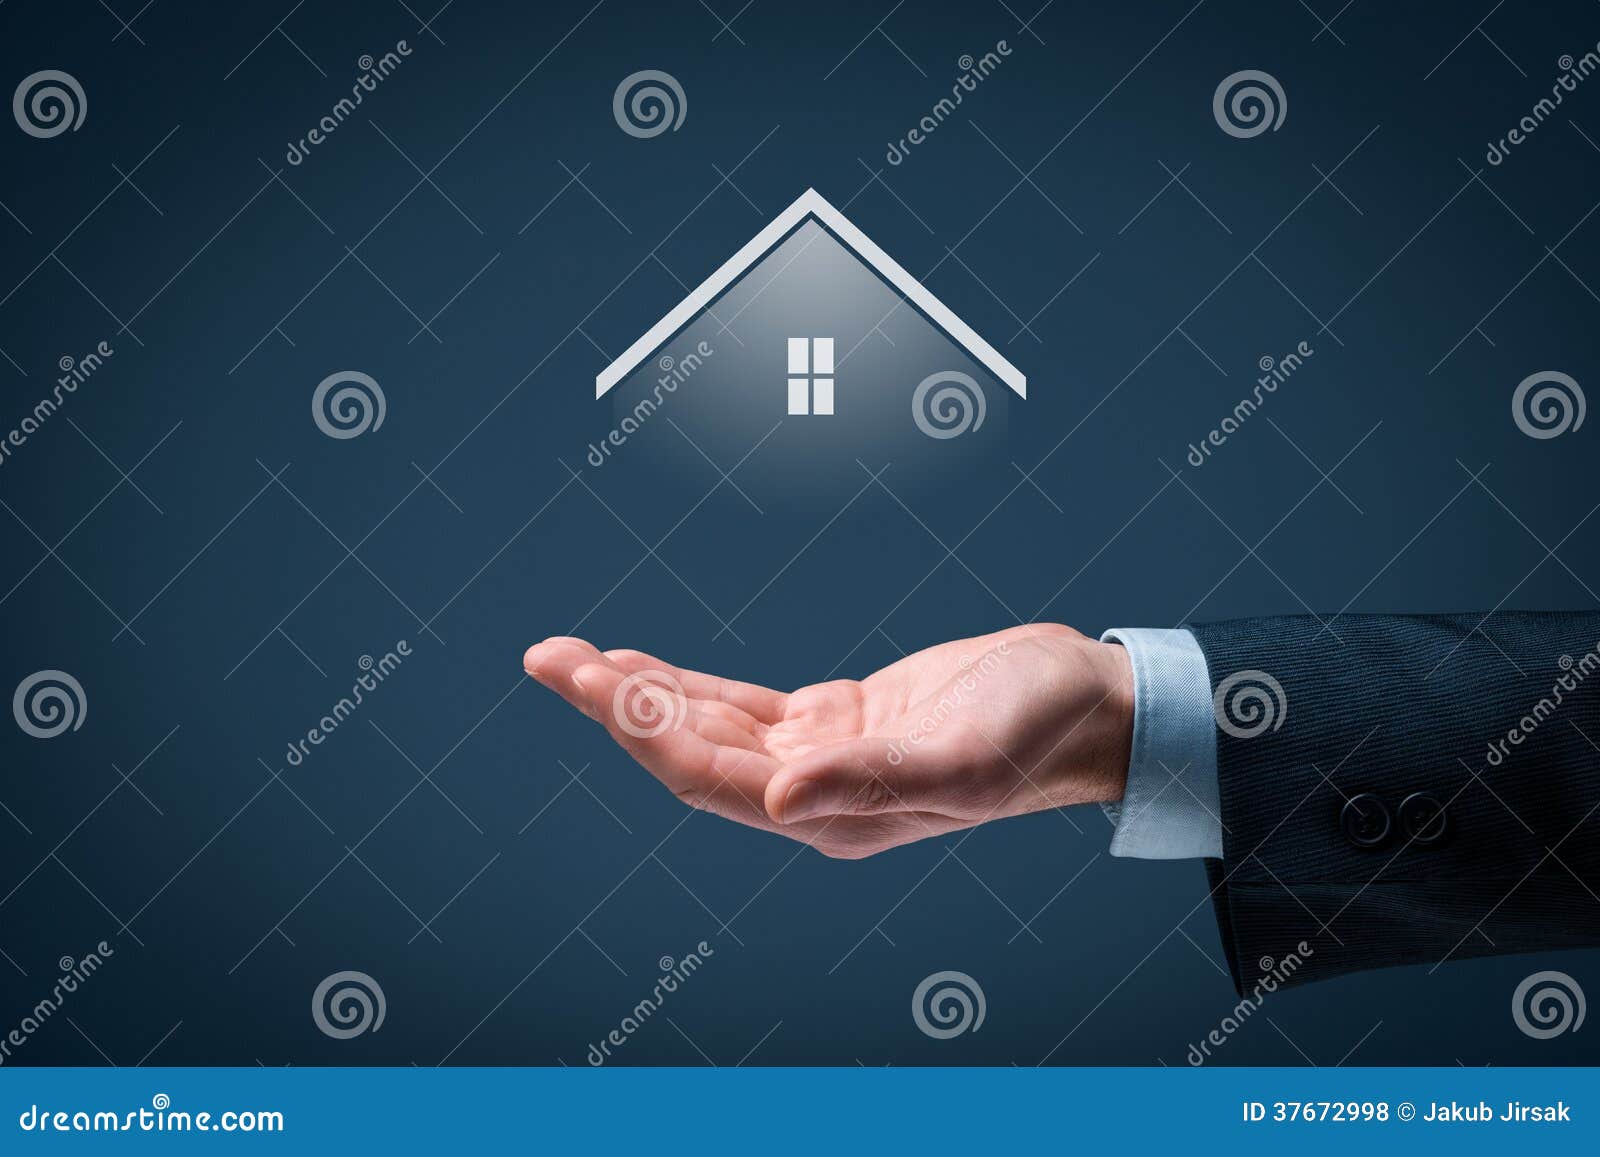 real estate agent